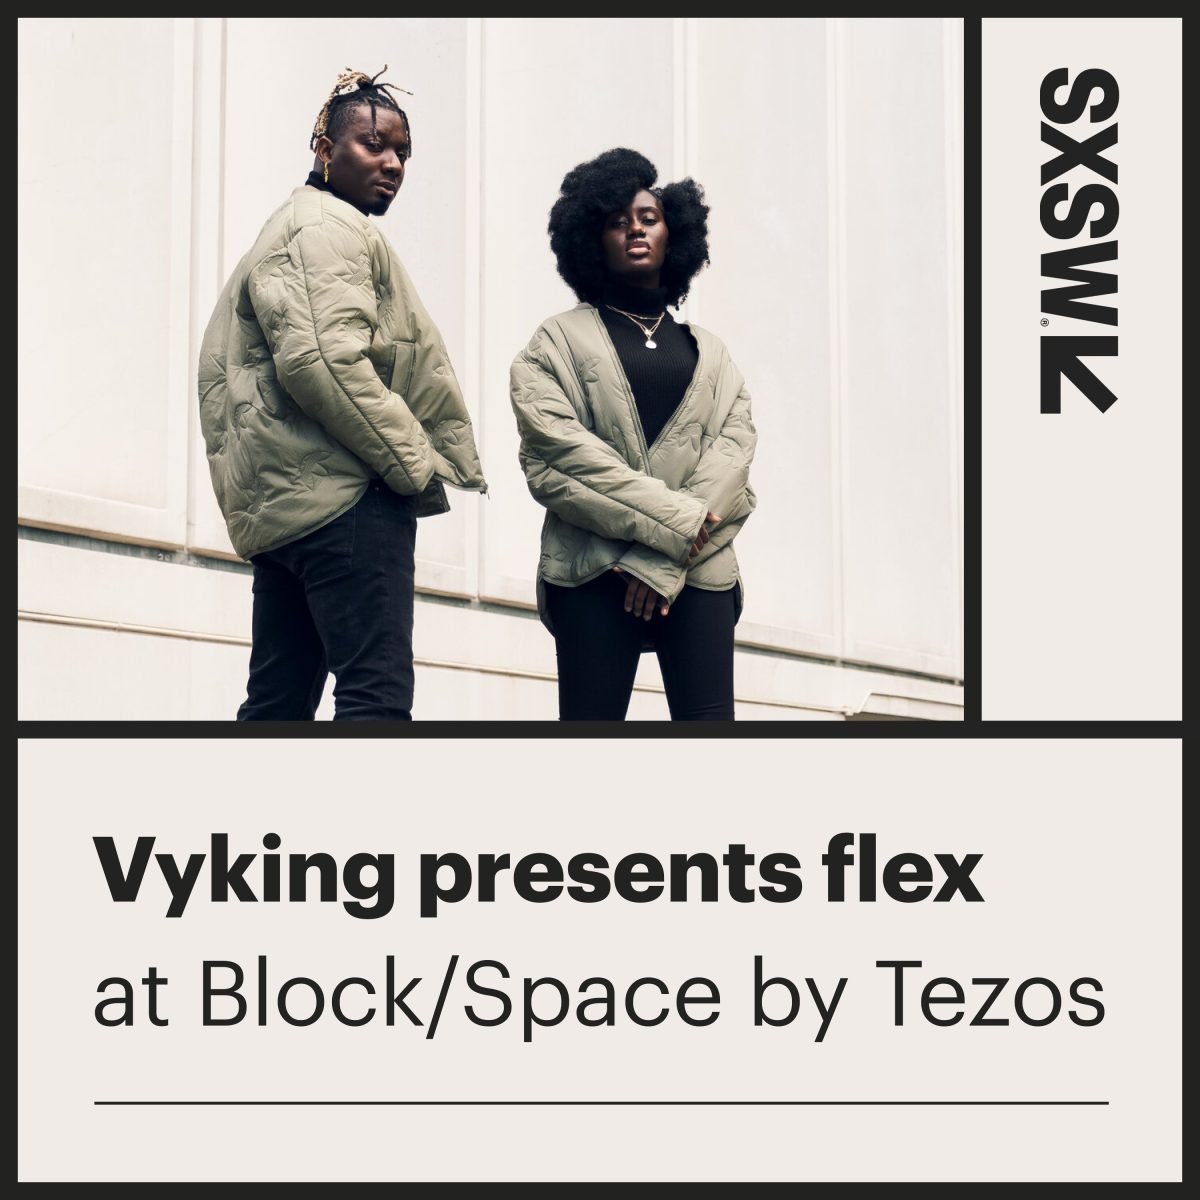 Image of the poster for Vyking and Flex 